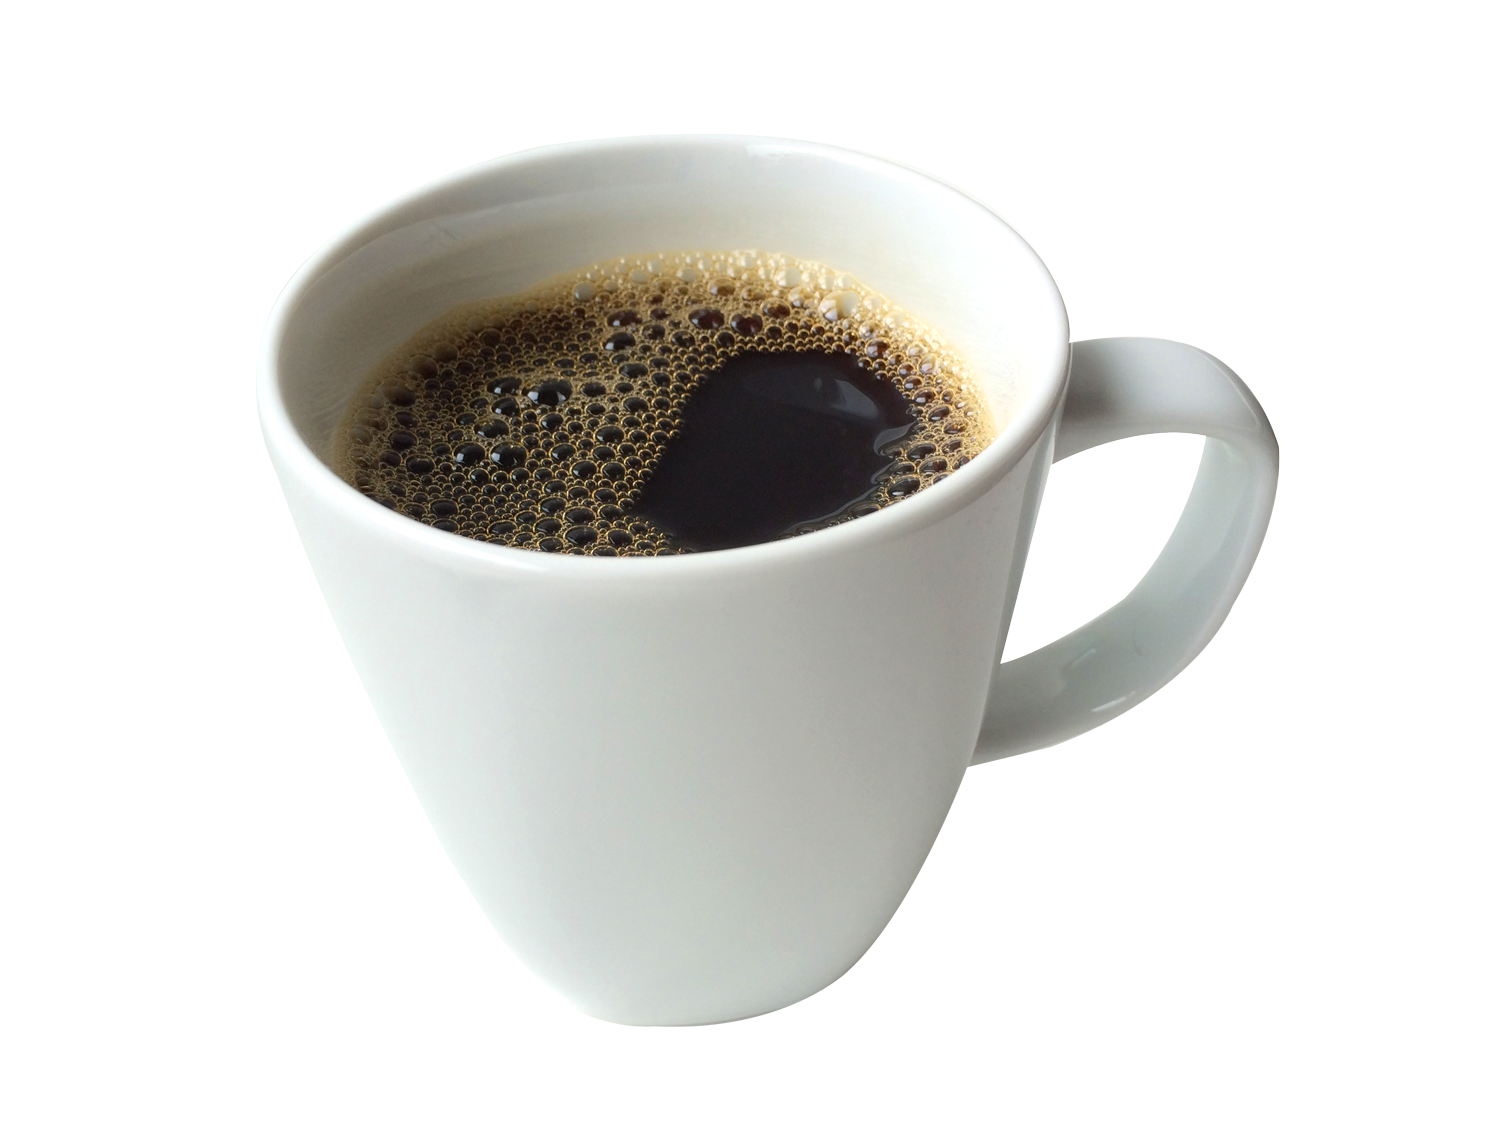 Red Cup of Coffee PNG Picture